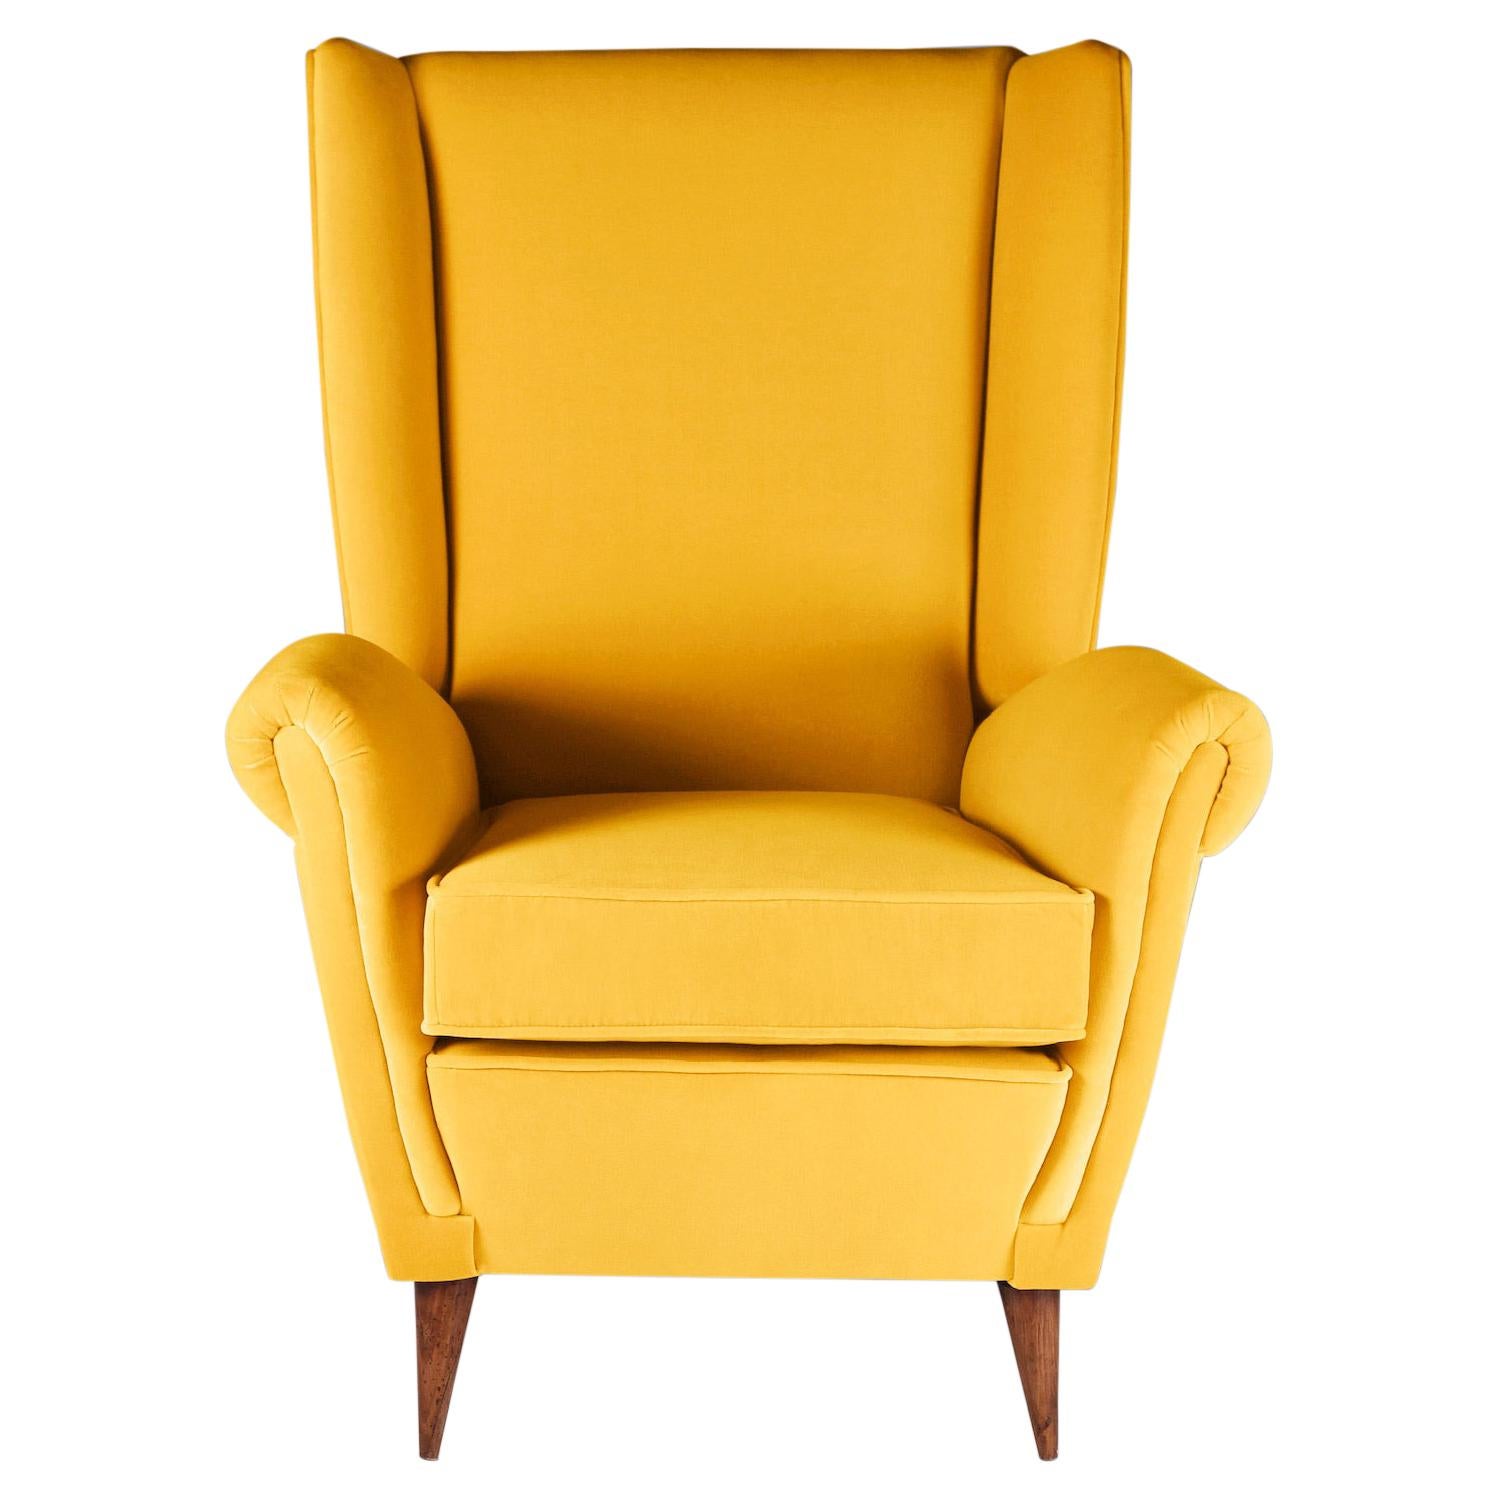 Mid-Century Modern Inspired Italian Style ‘Marcello’ Lounge Chair For Sale